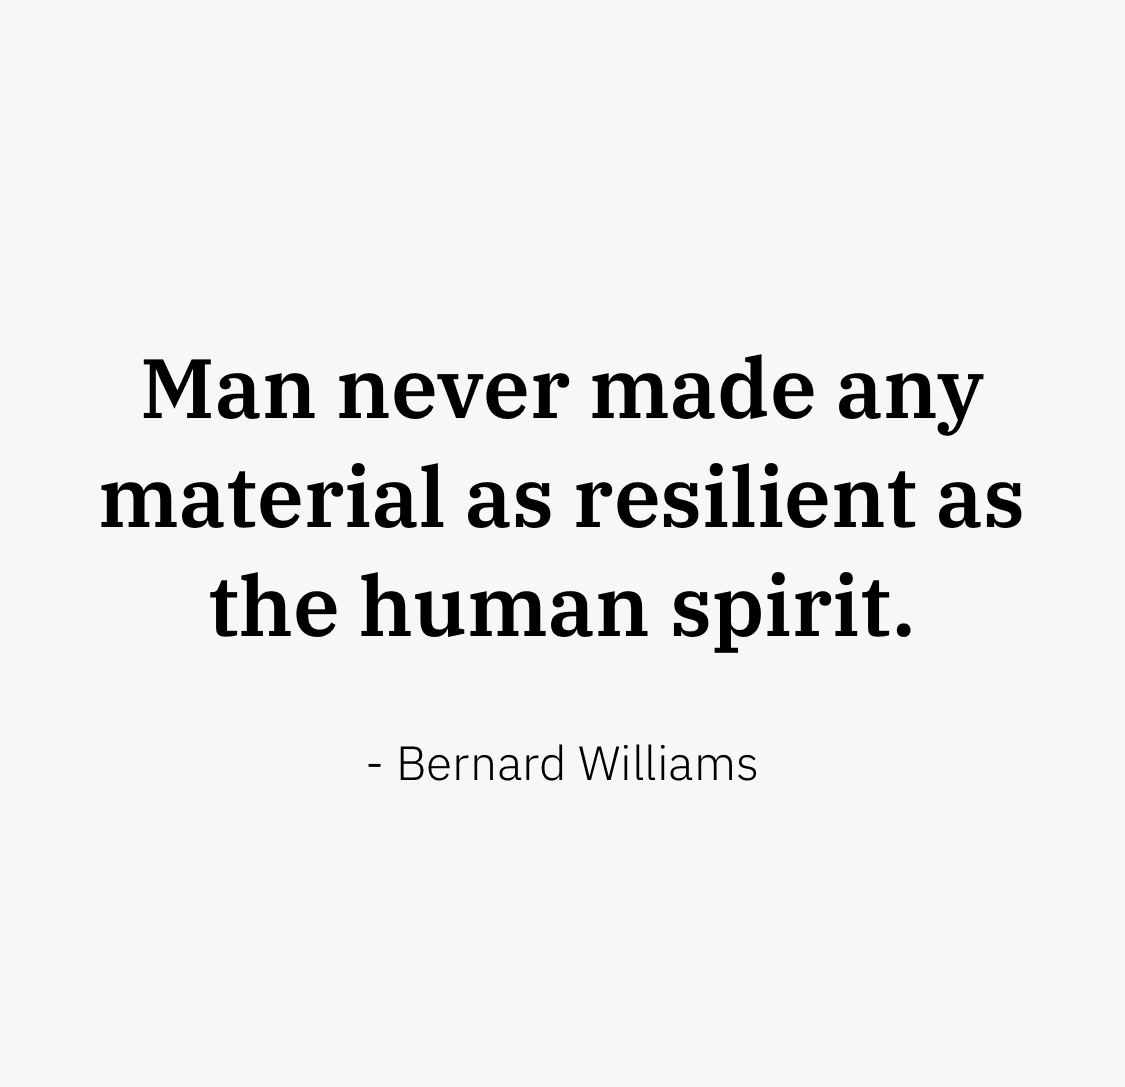 Man never made any material as resilient as the human spirit. Bernard Williams